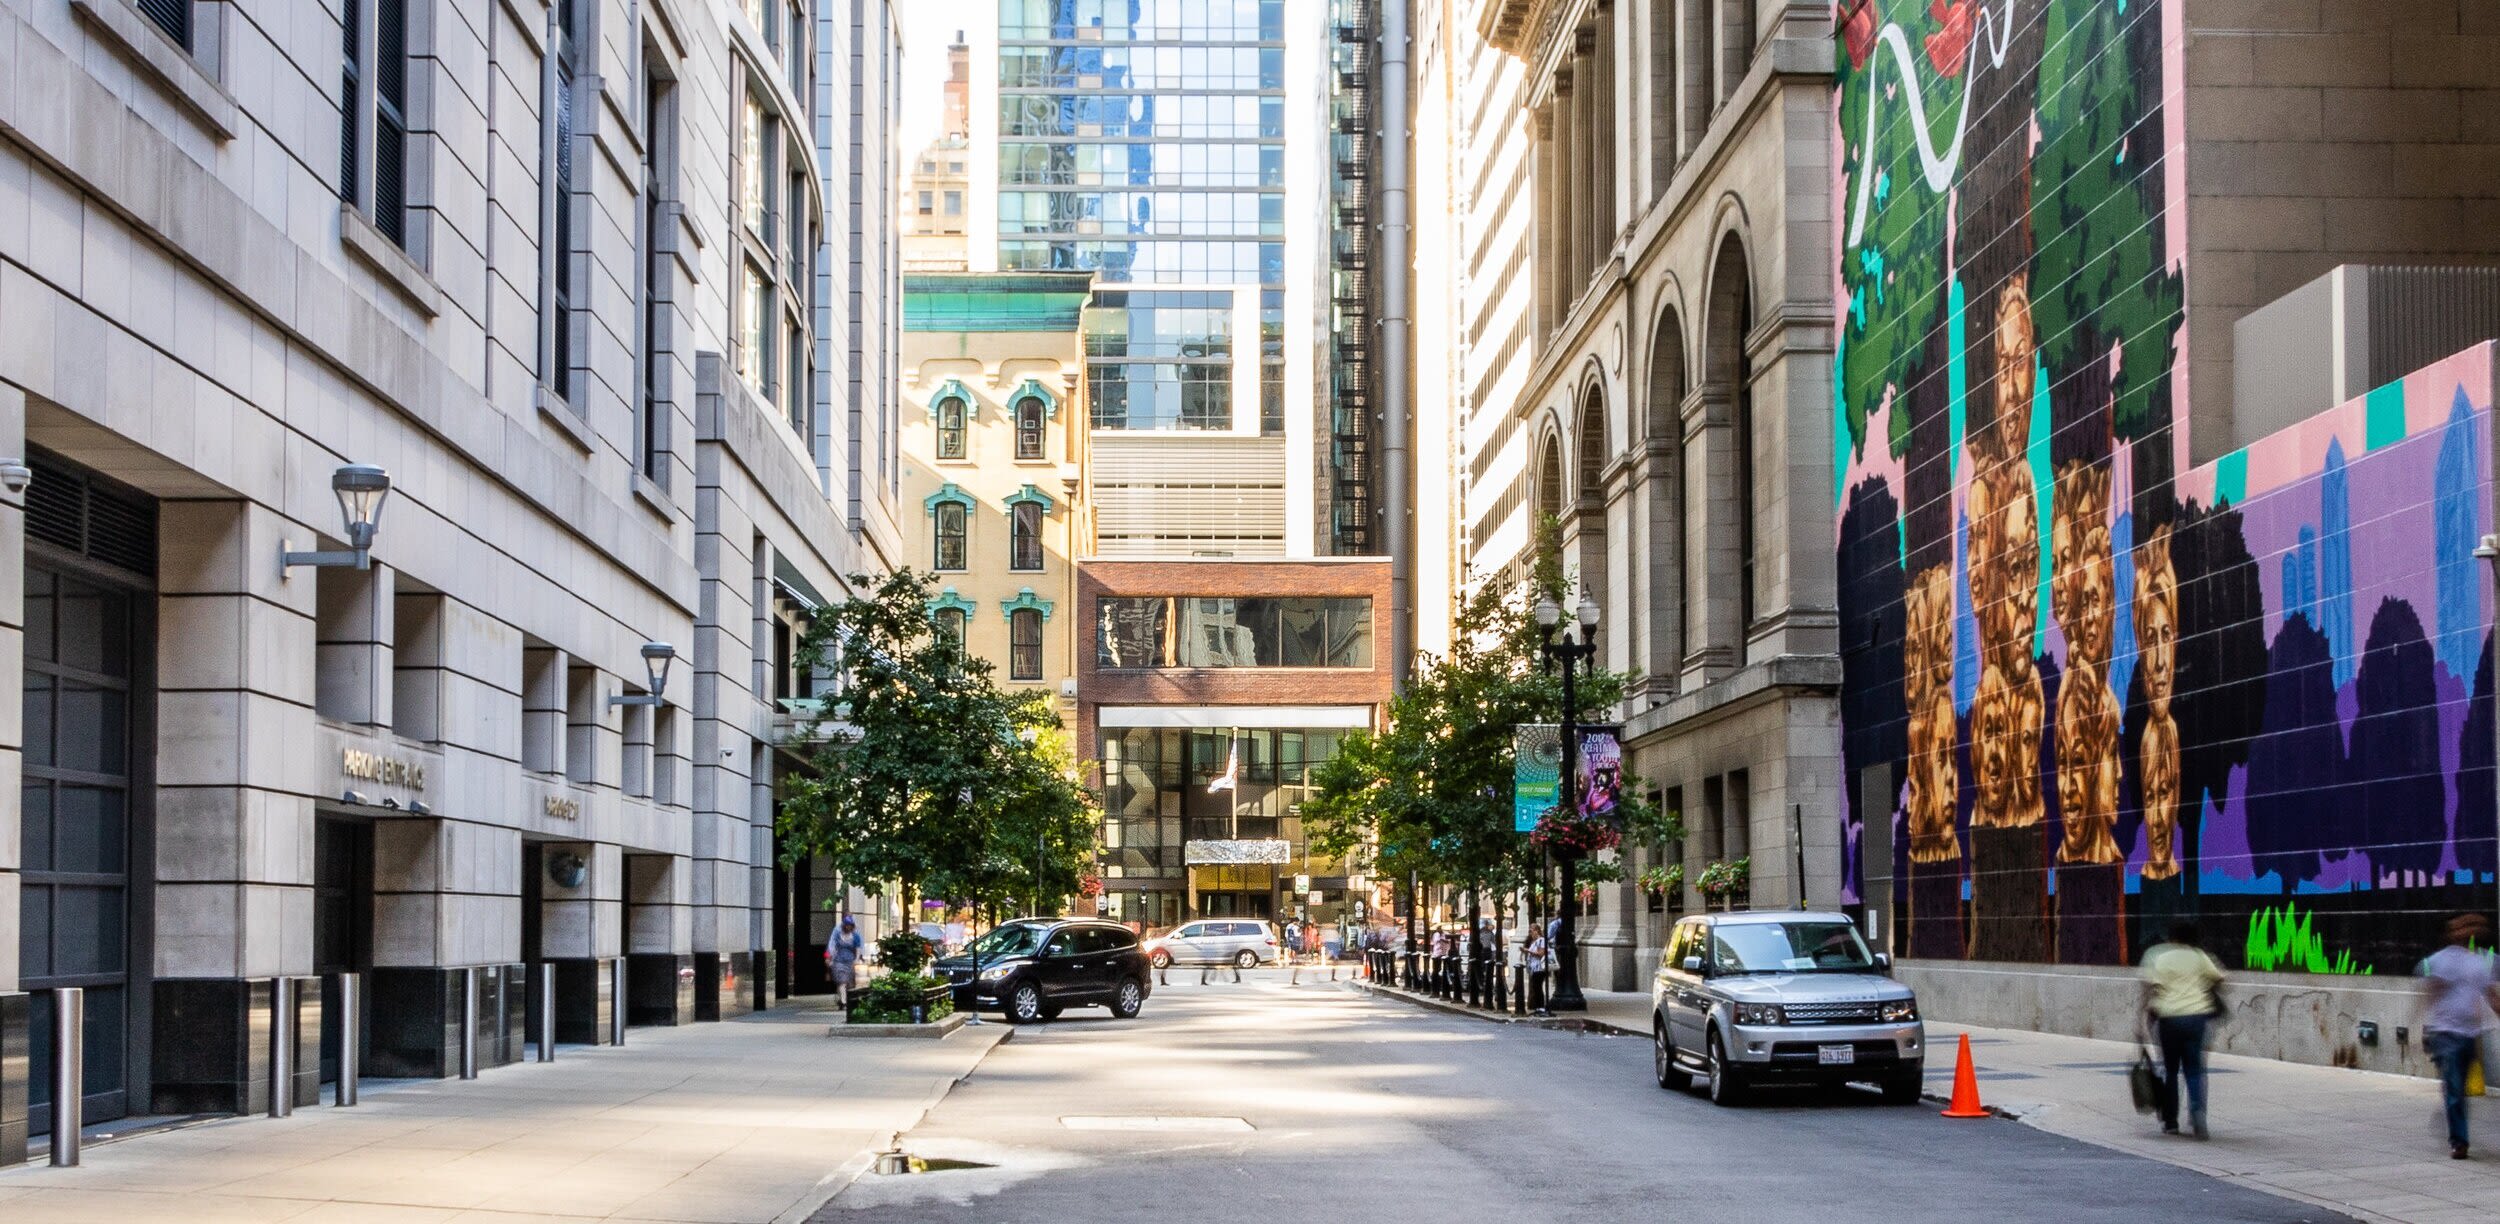 A street in Chicago's downtown, with a vibrant mural depicting women's faces and trees on the right